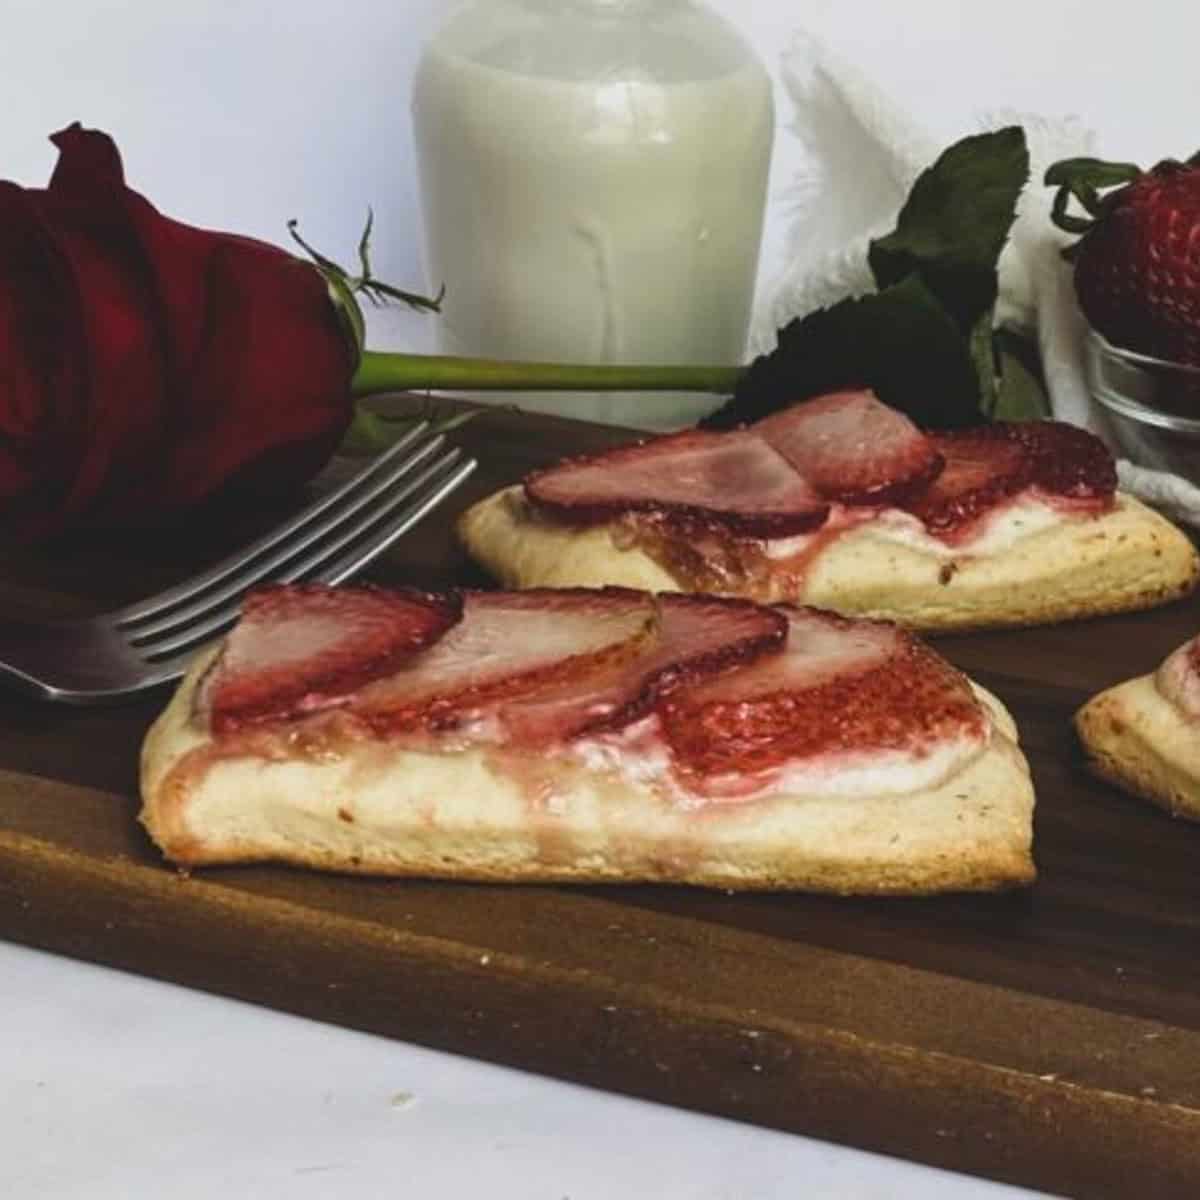 Two slices of strawberry gluten free puff pastry on a wooden cutting board. Each slice has a golden brown crust topped with sliced strawberries and cream cheese frosting.